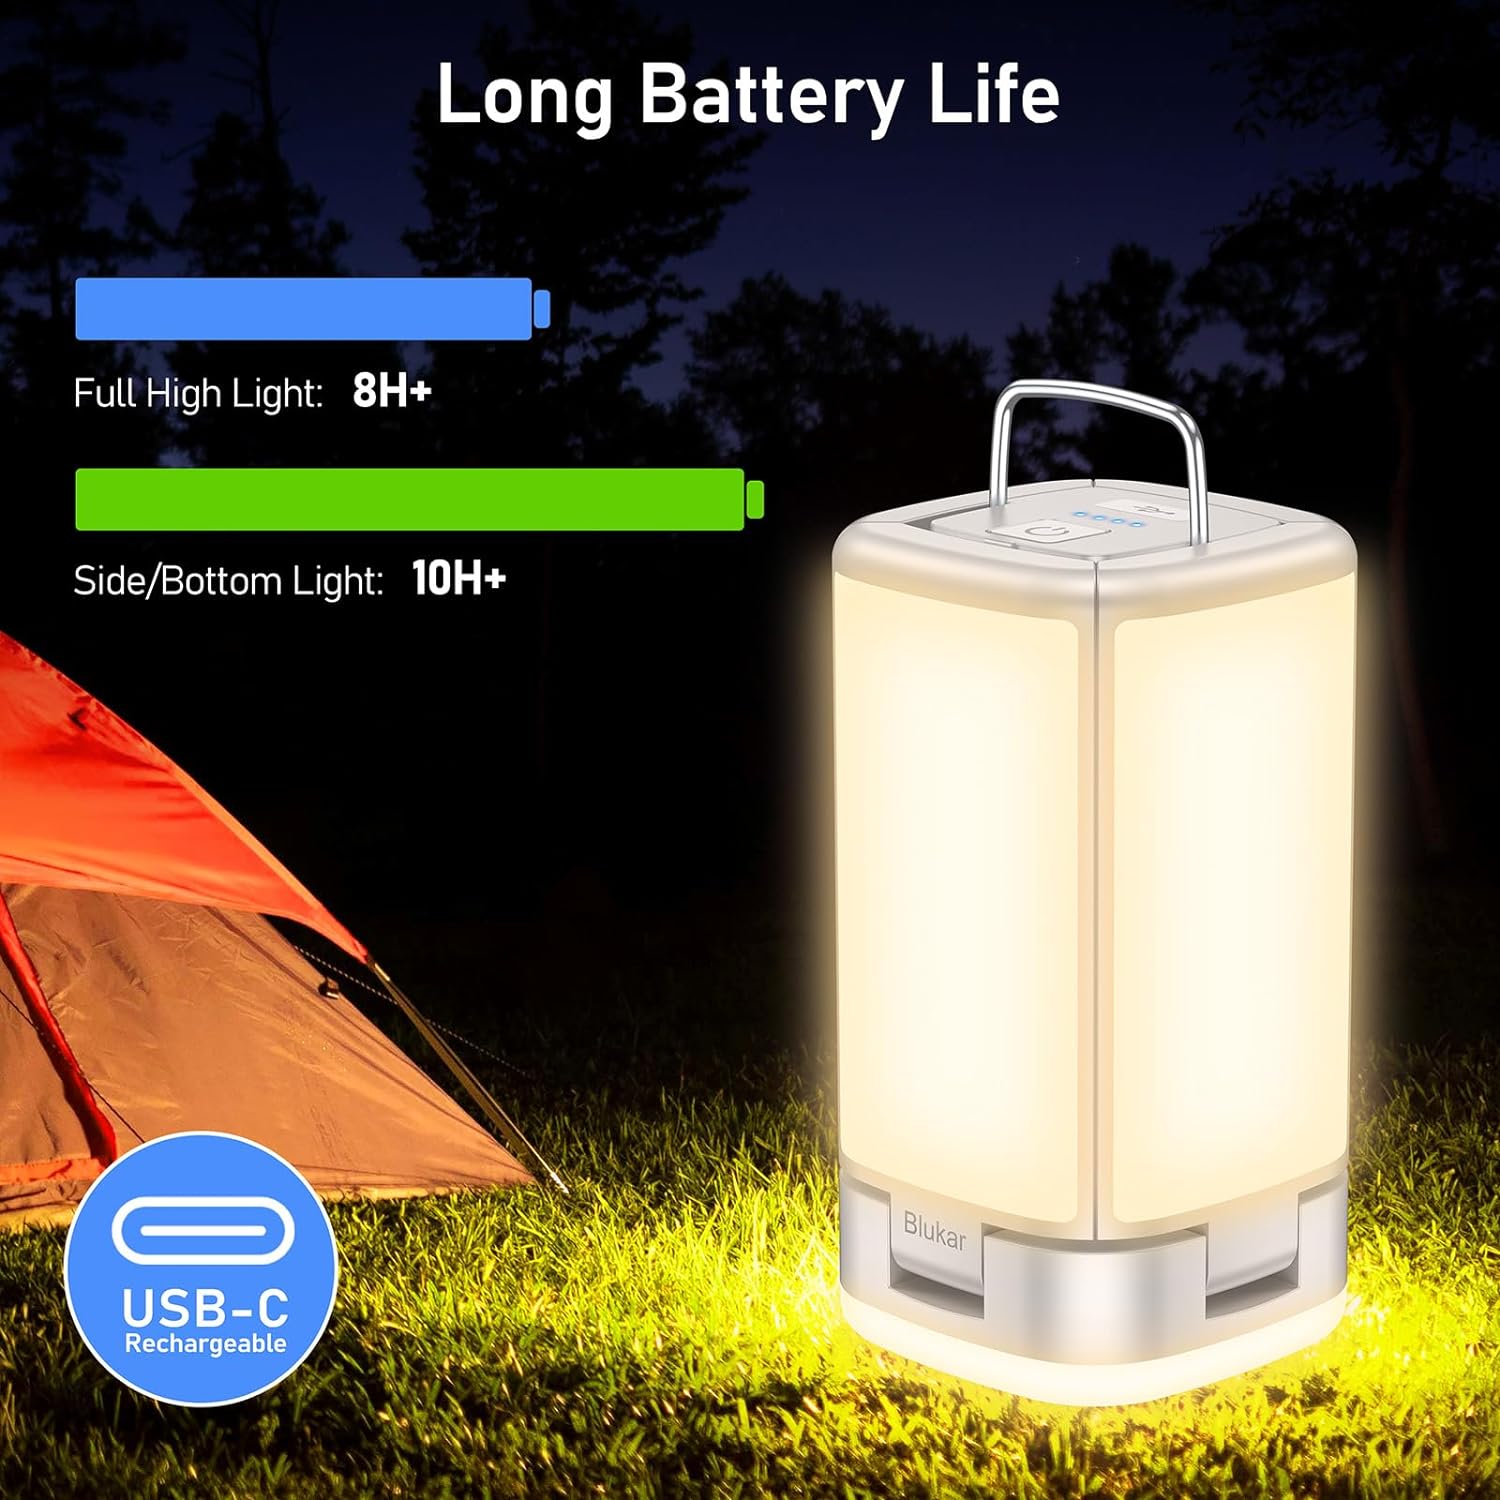 Blukar Outdoor Hanging Camping Lights Lamp Rechargeable with 7 Light Modes & 90°Adjustable